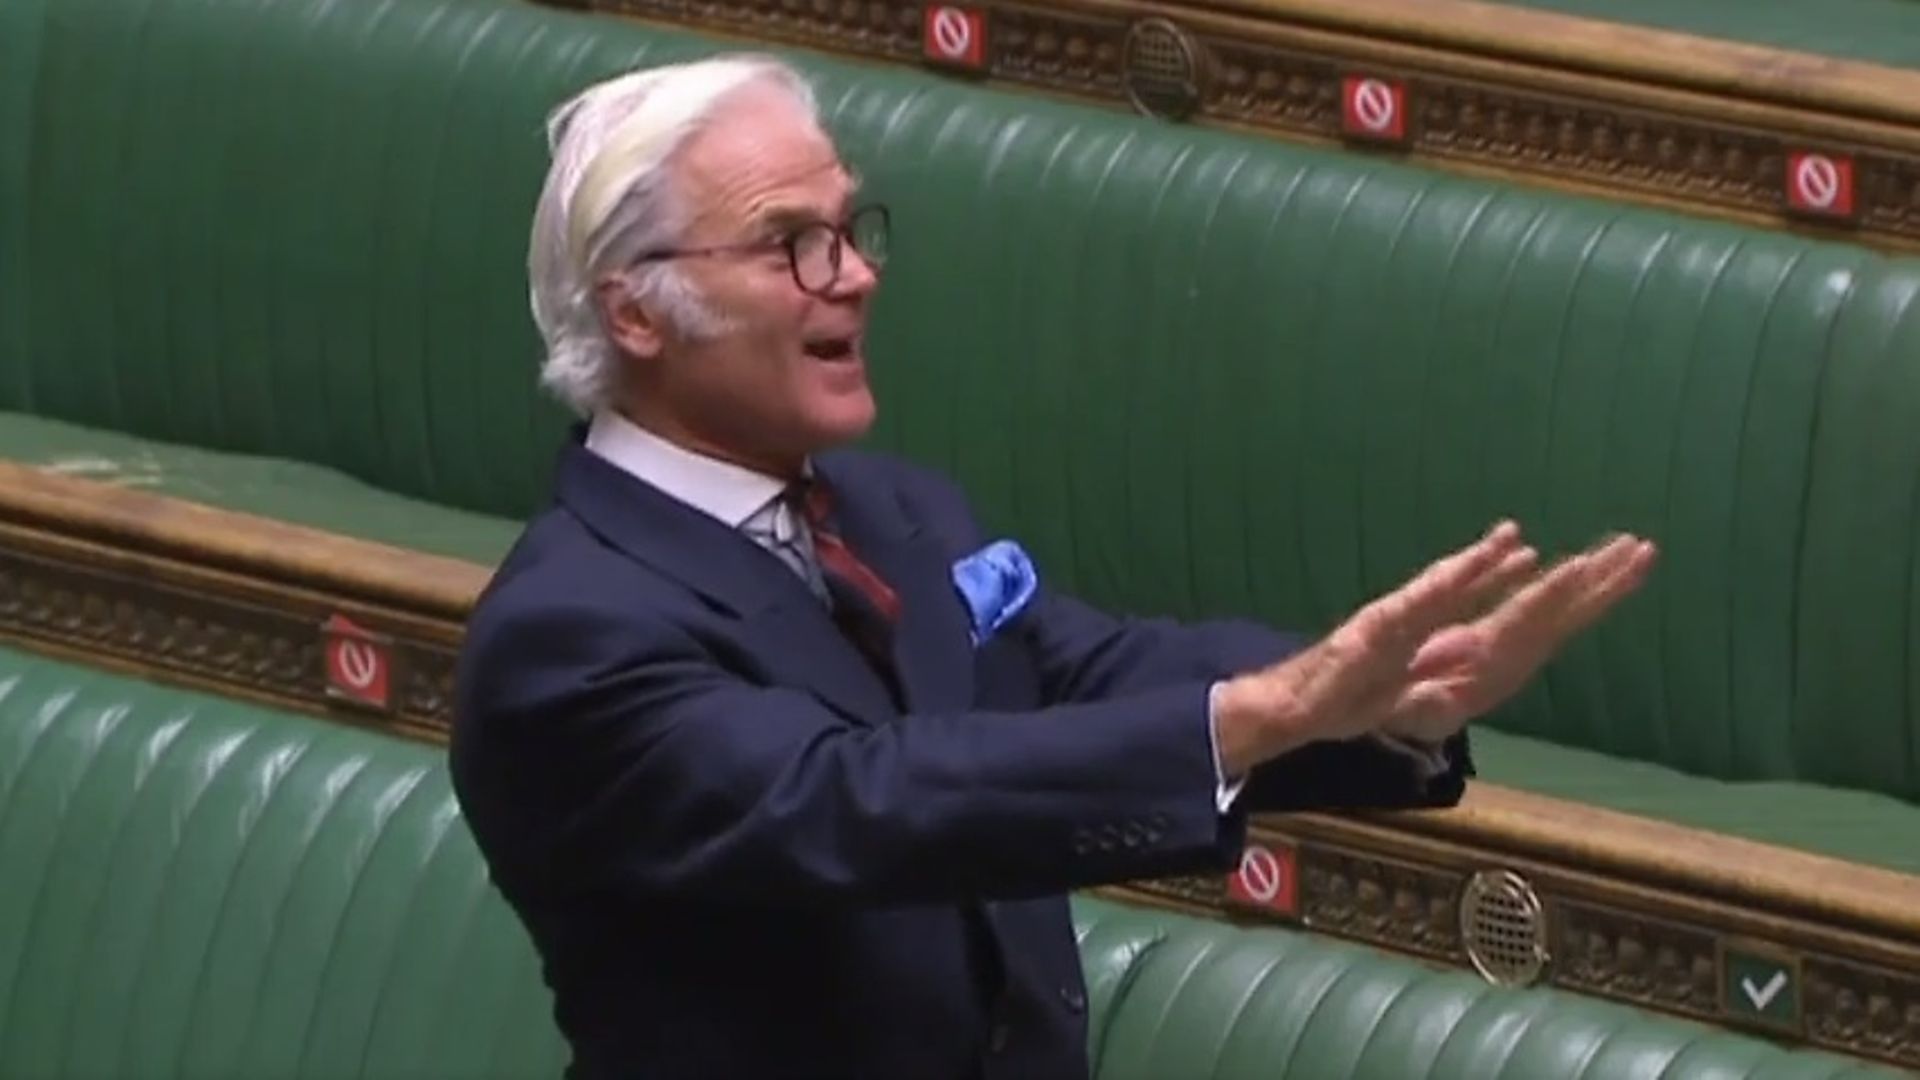 Tory Brexiteer MP Desmond Swayne in the House of Commons - Credit: Parliament TV